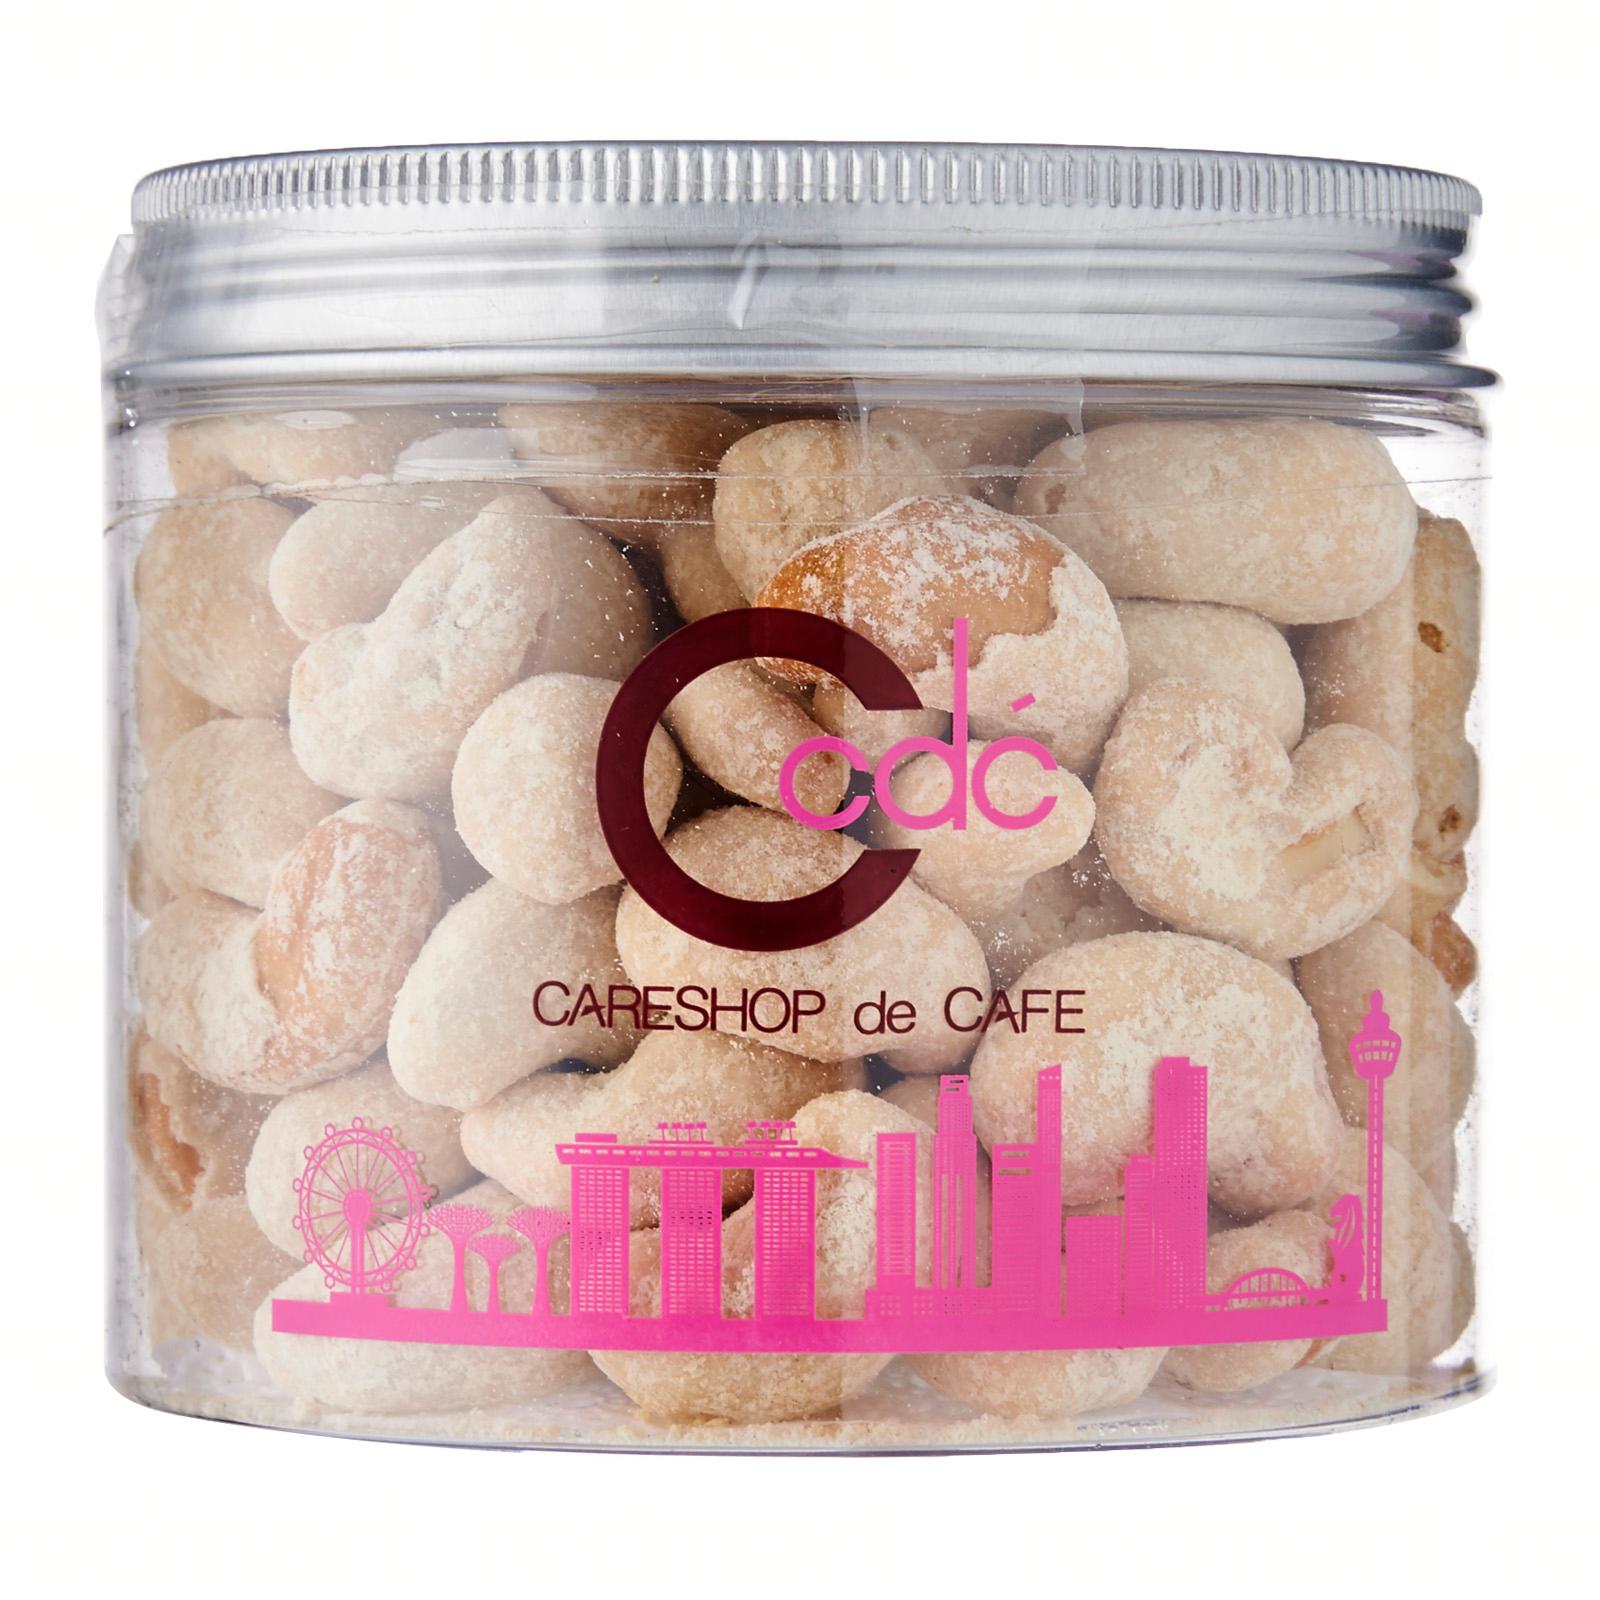 CDC Garlic Onion Cashew Nuts-Using garlic and onion as seasoning, the cashew nuts are coated with it resulting in a crunchy and savory snack.